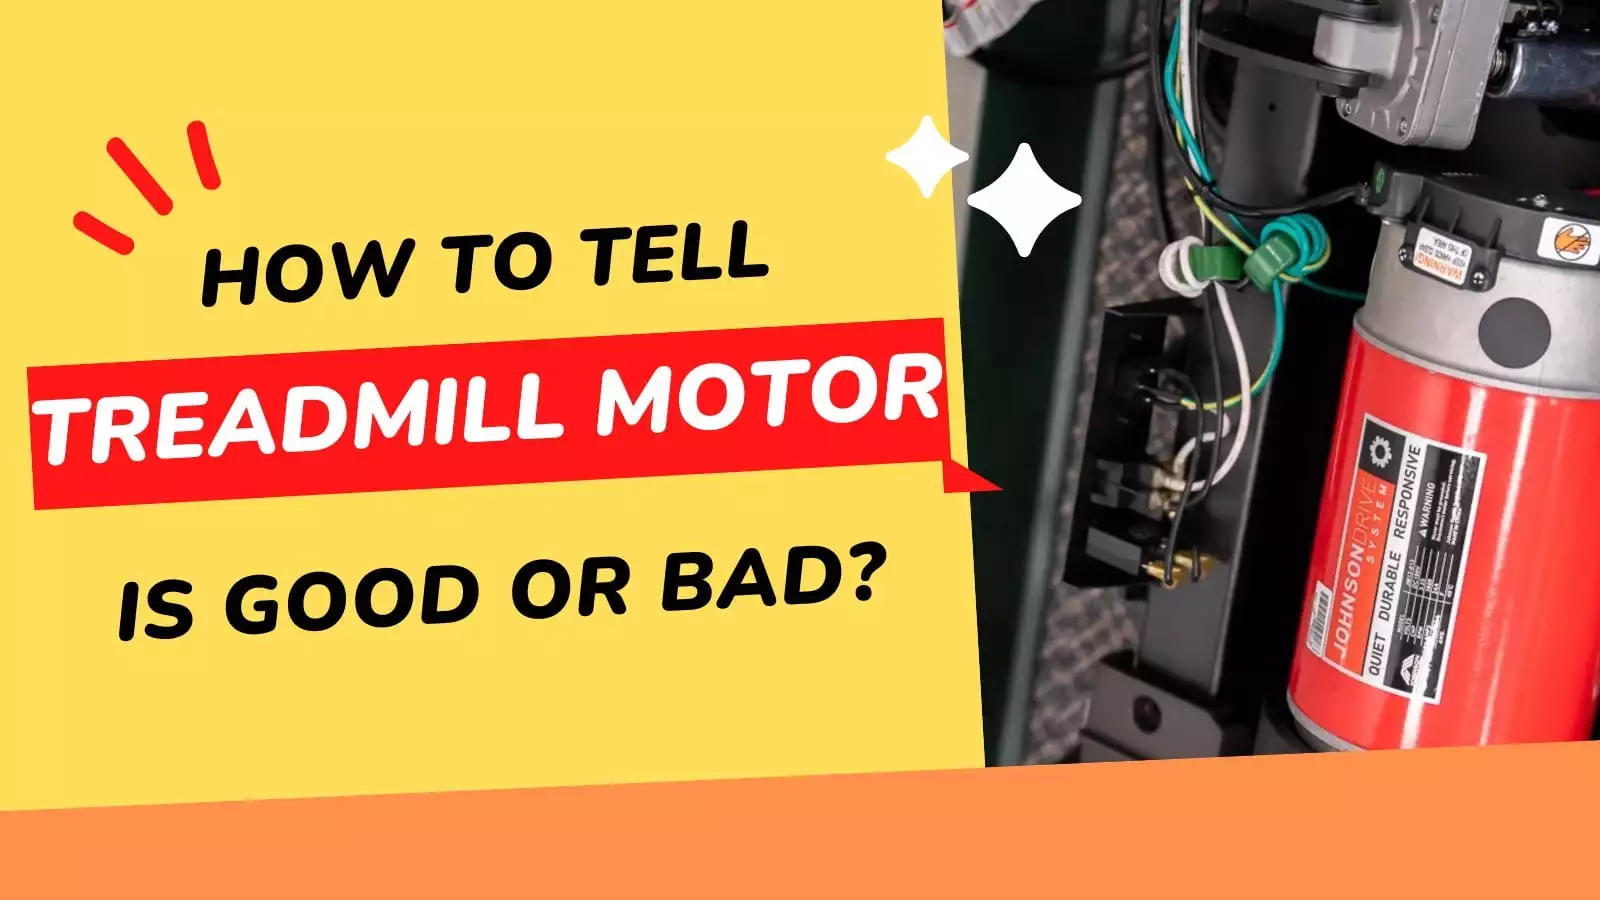 how to tell treadmill motor is good or bad